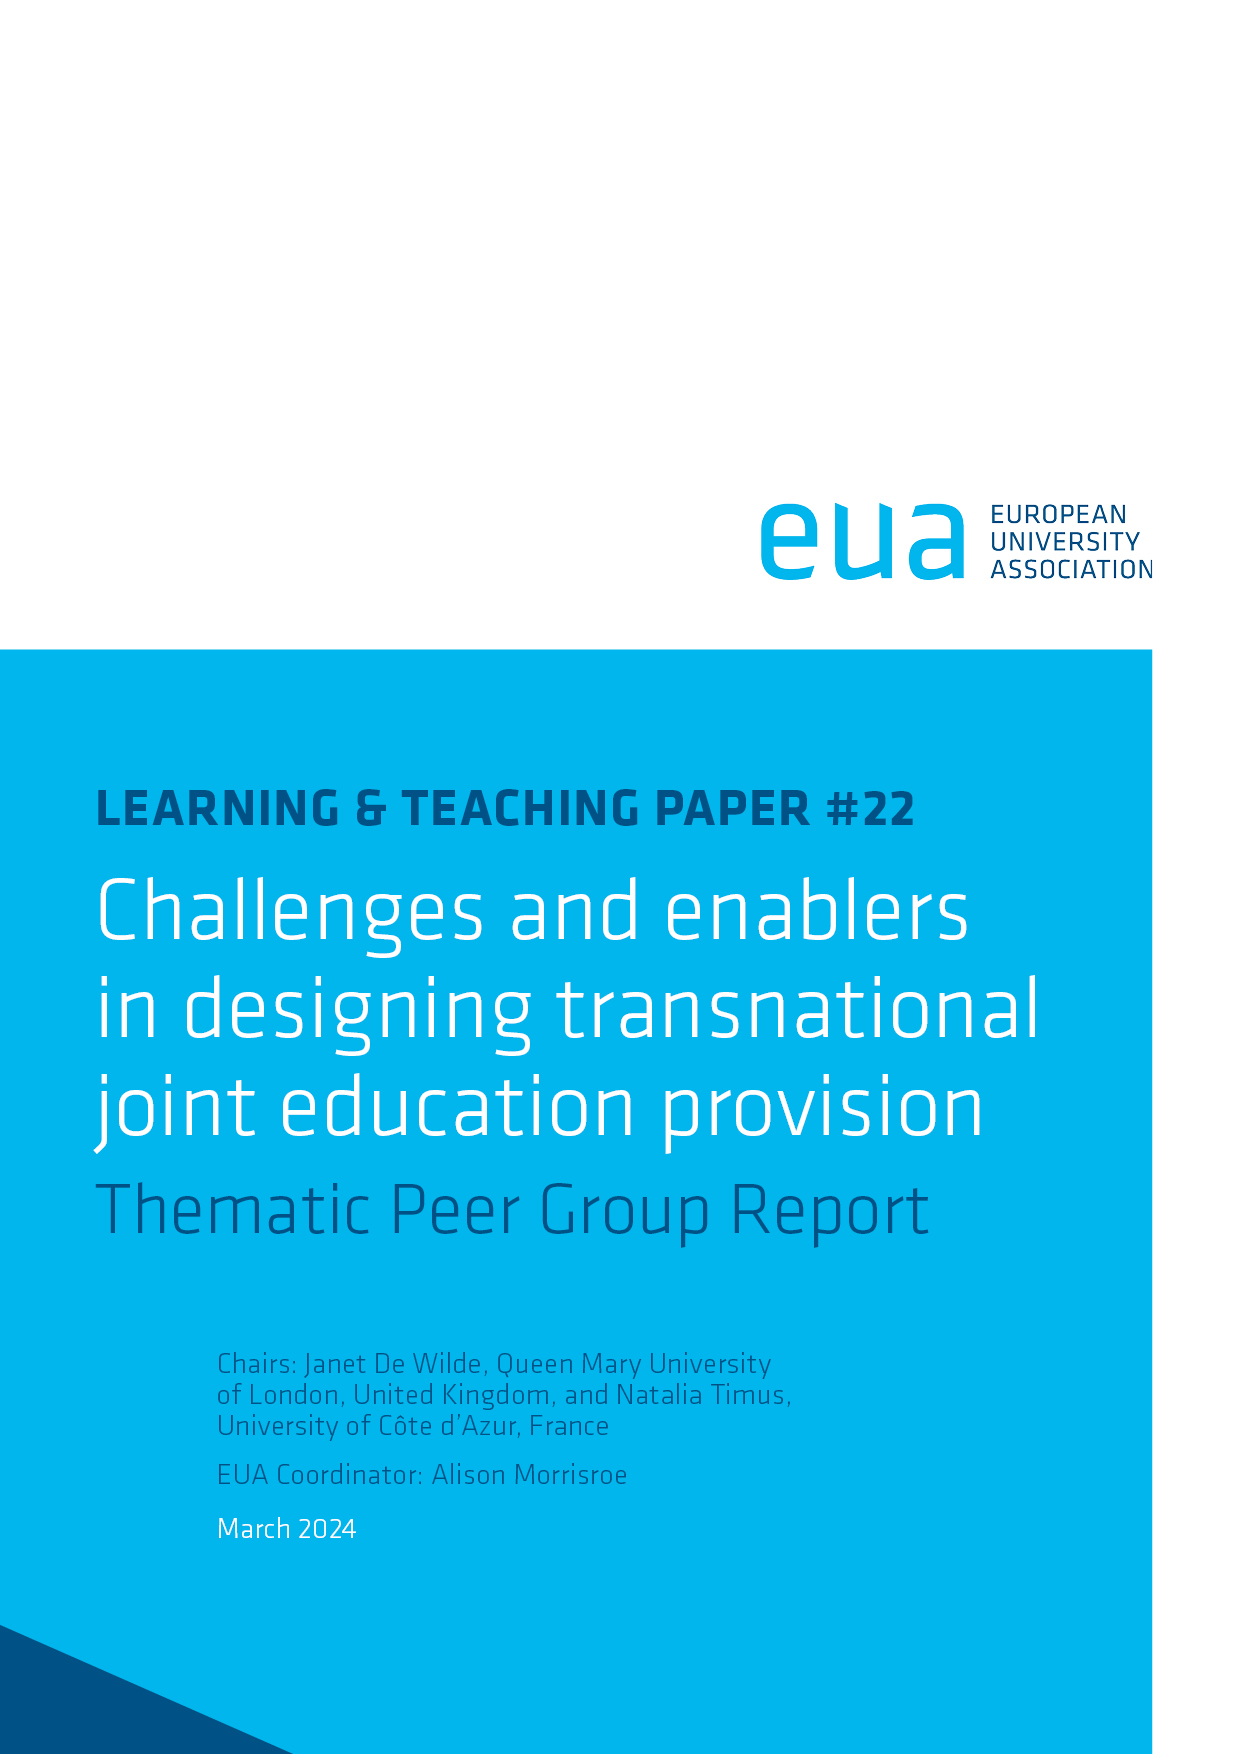 Challenges and enablers in designing transnational joint education provision